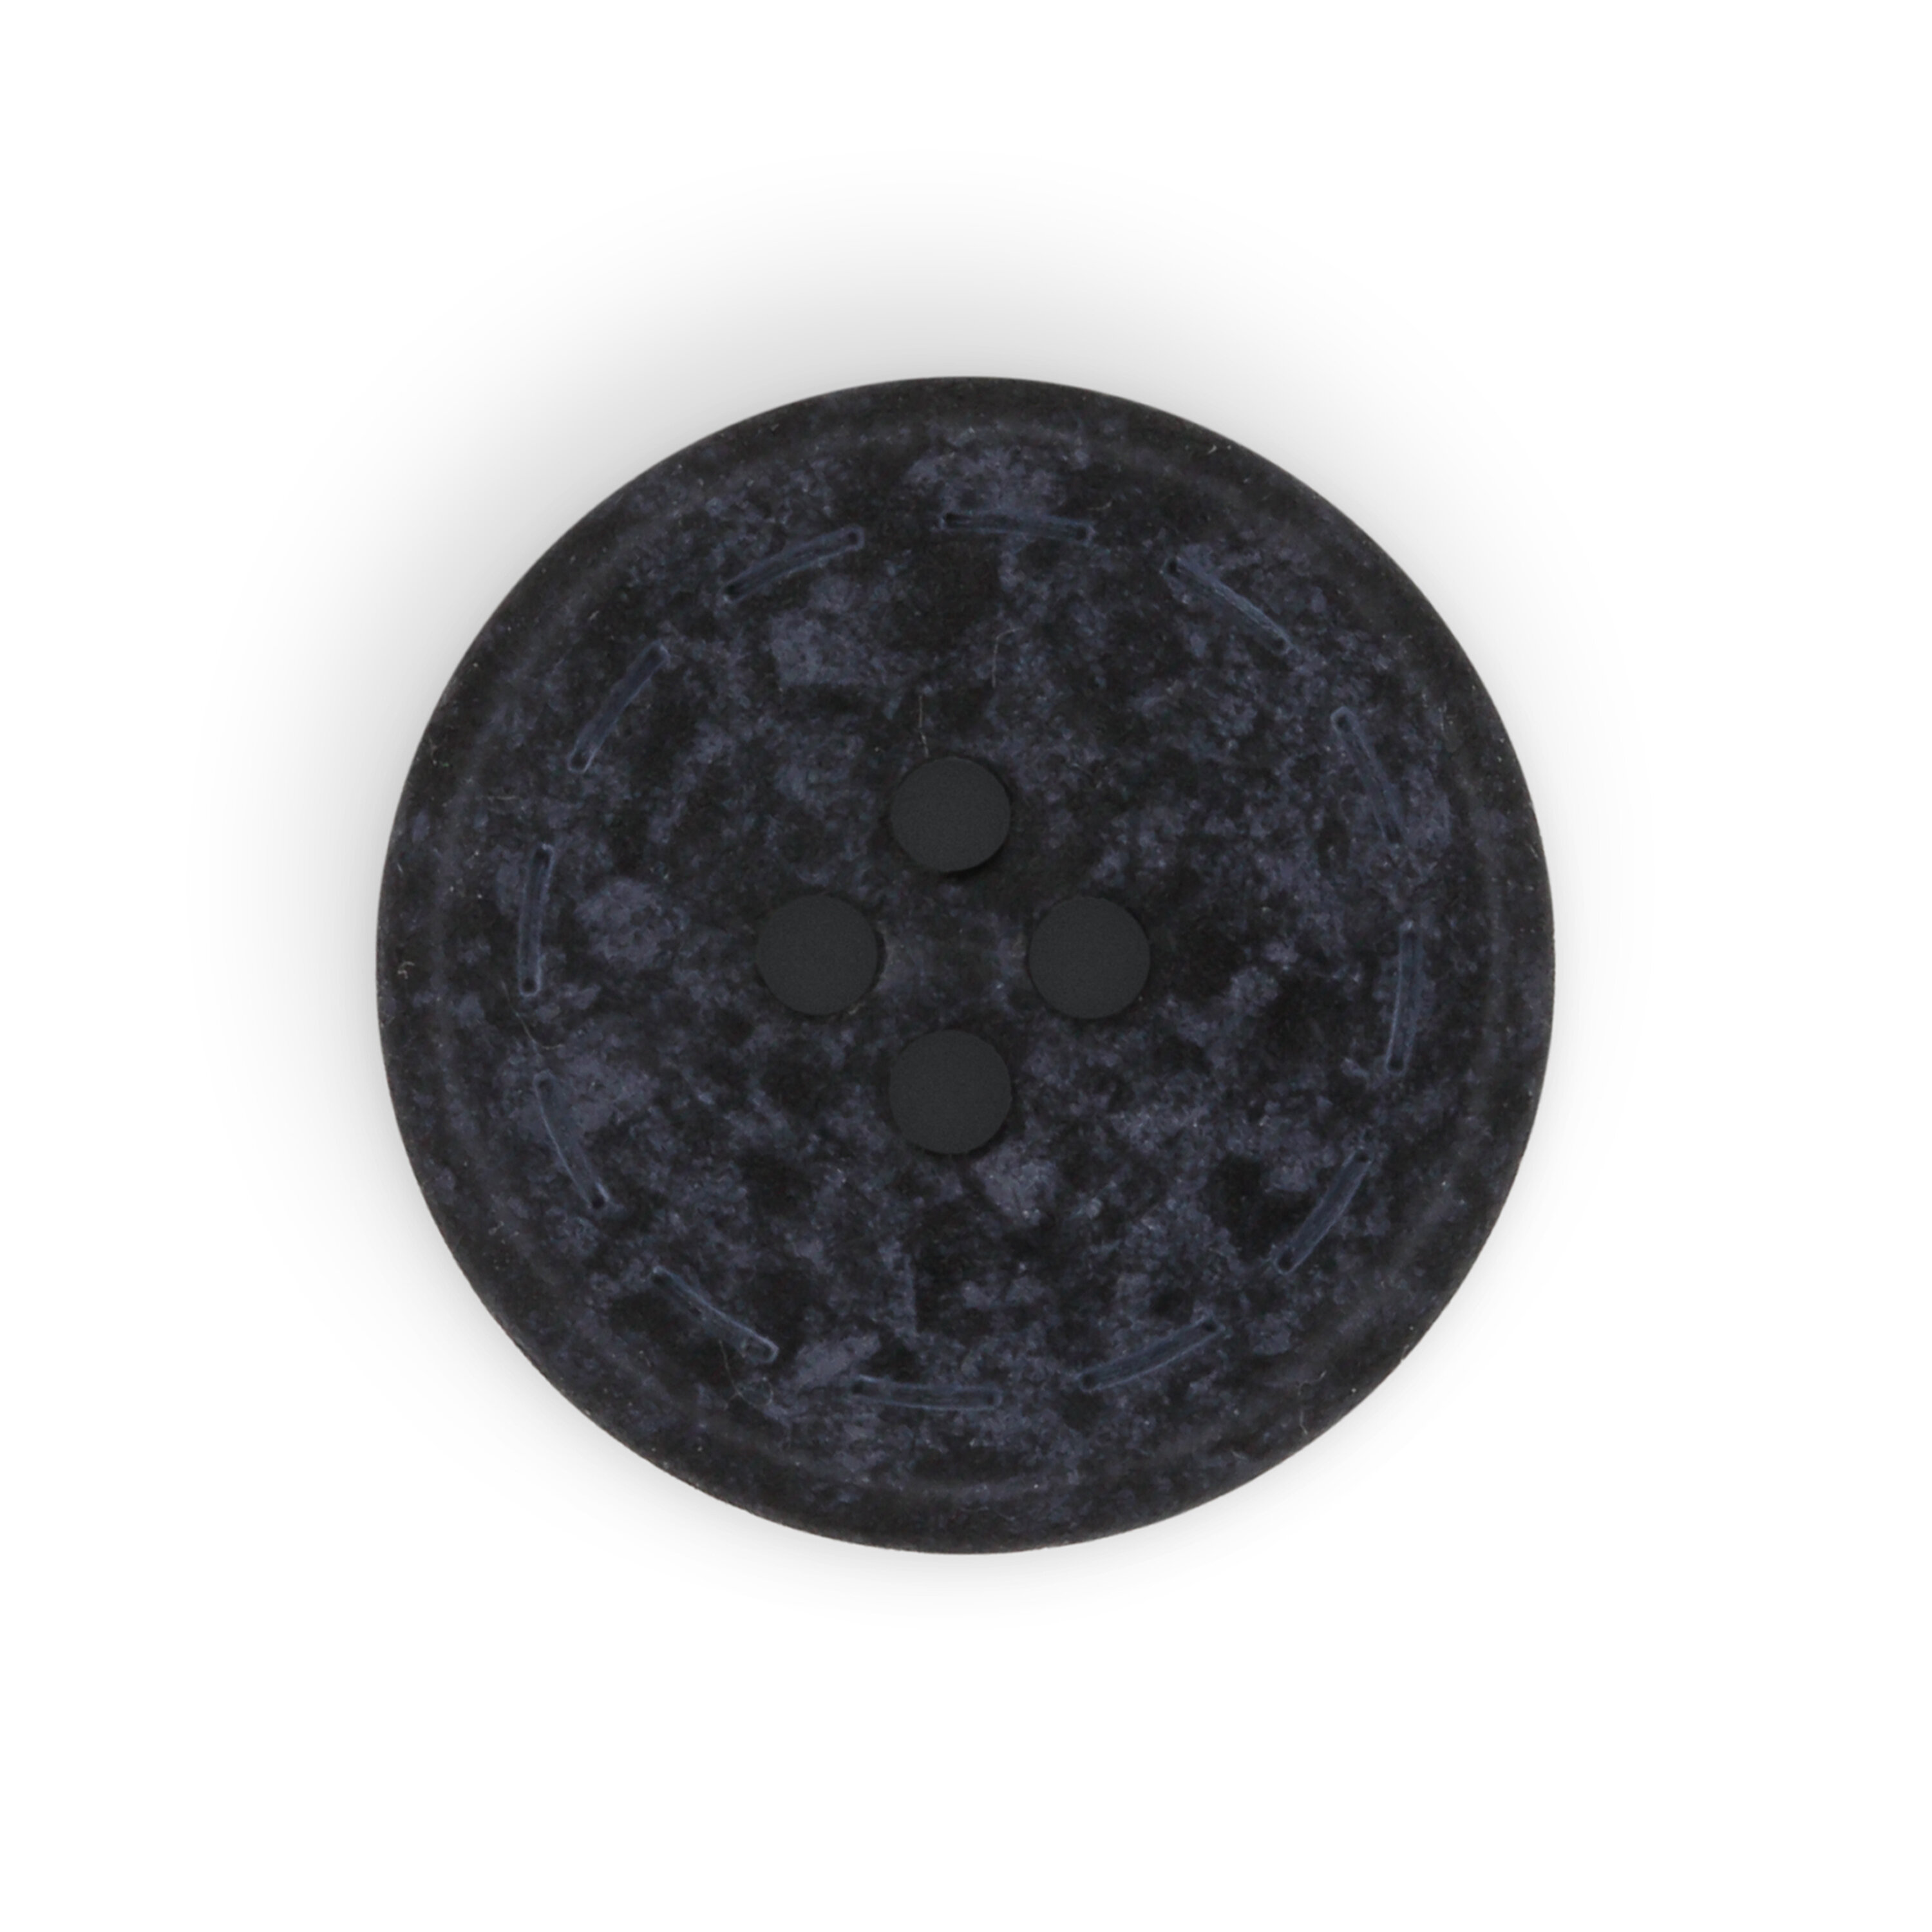 Dritz Recycled Cotton Round Stitch Button, 20mm, Black, 9 Buttons